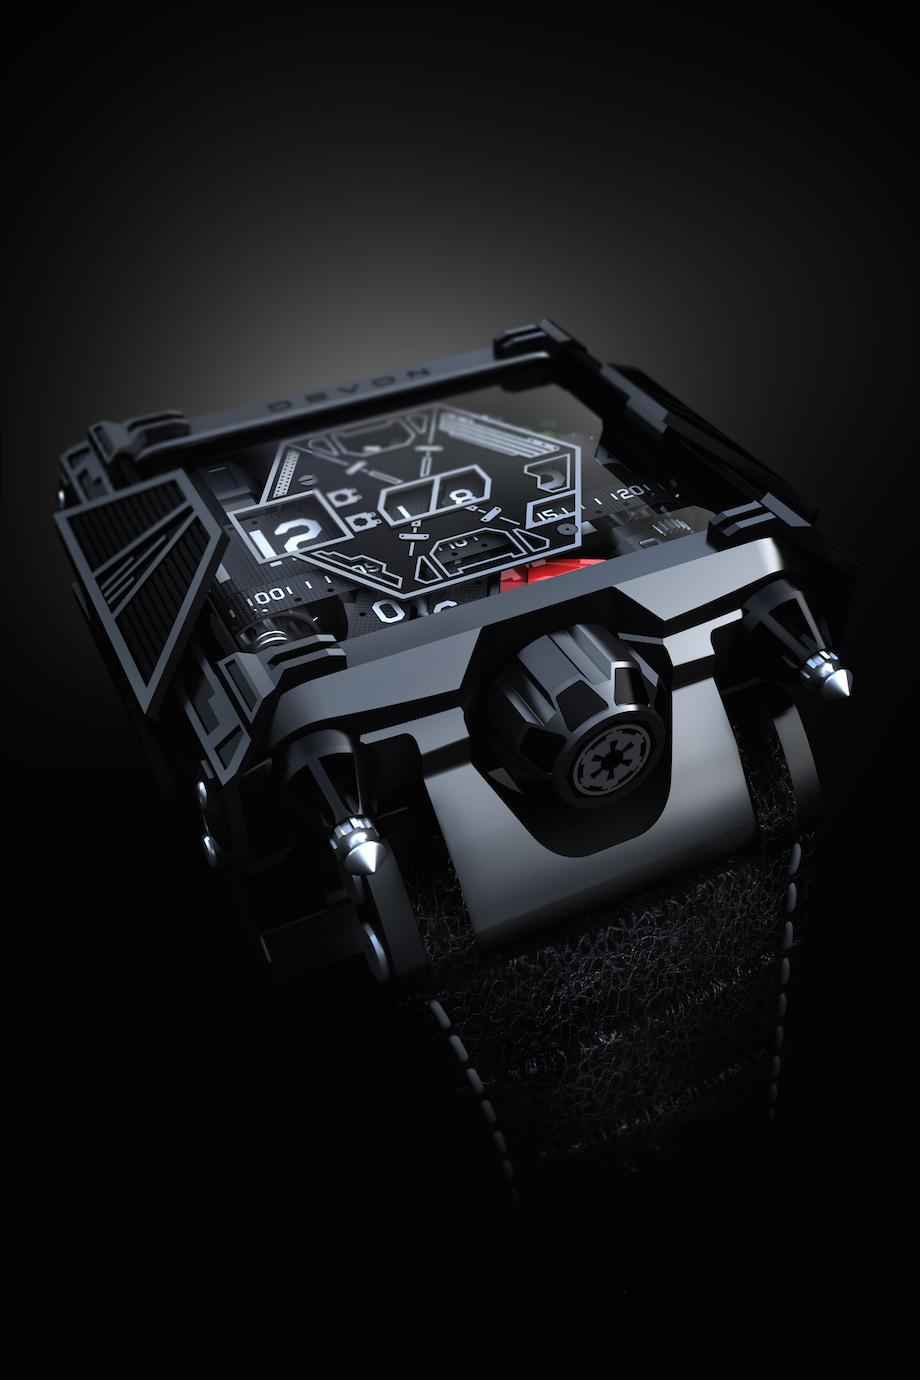 This is what Darth Vader’s watch would look like!